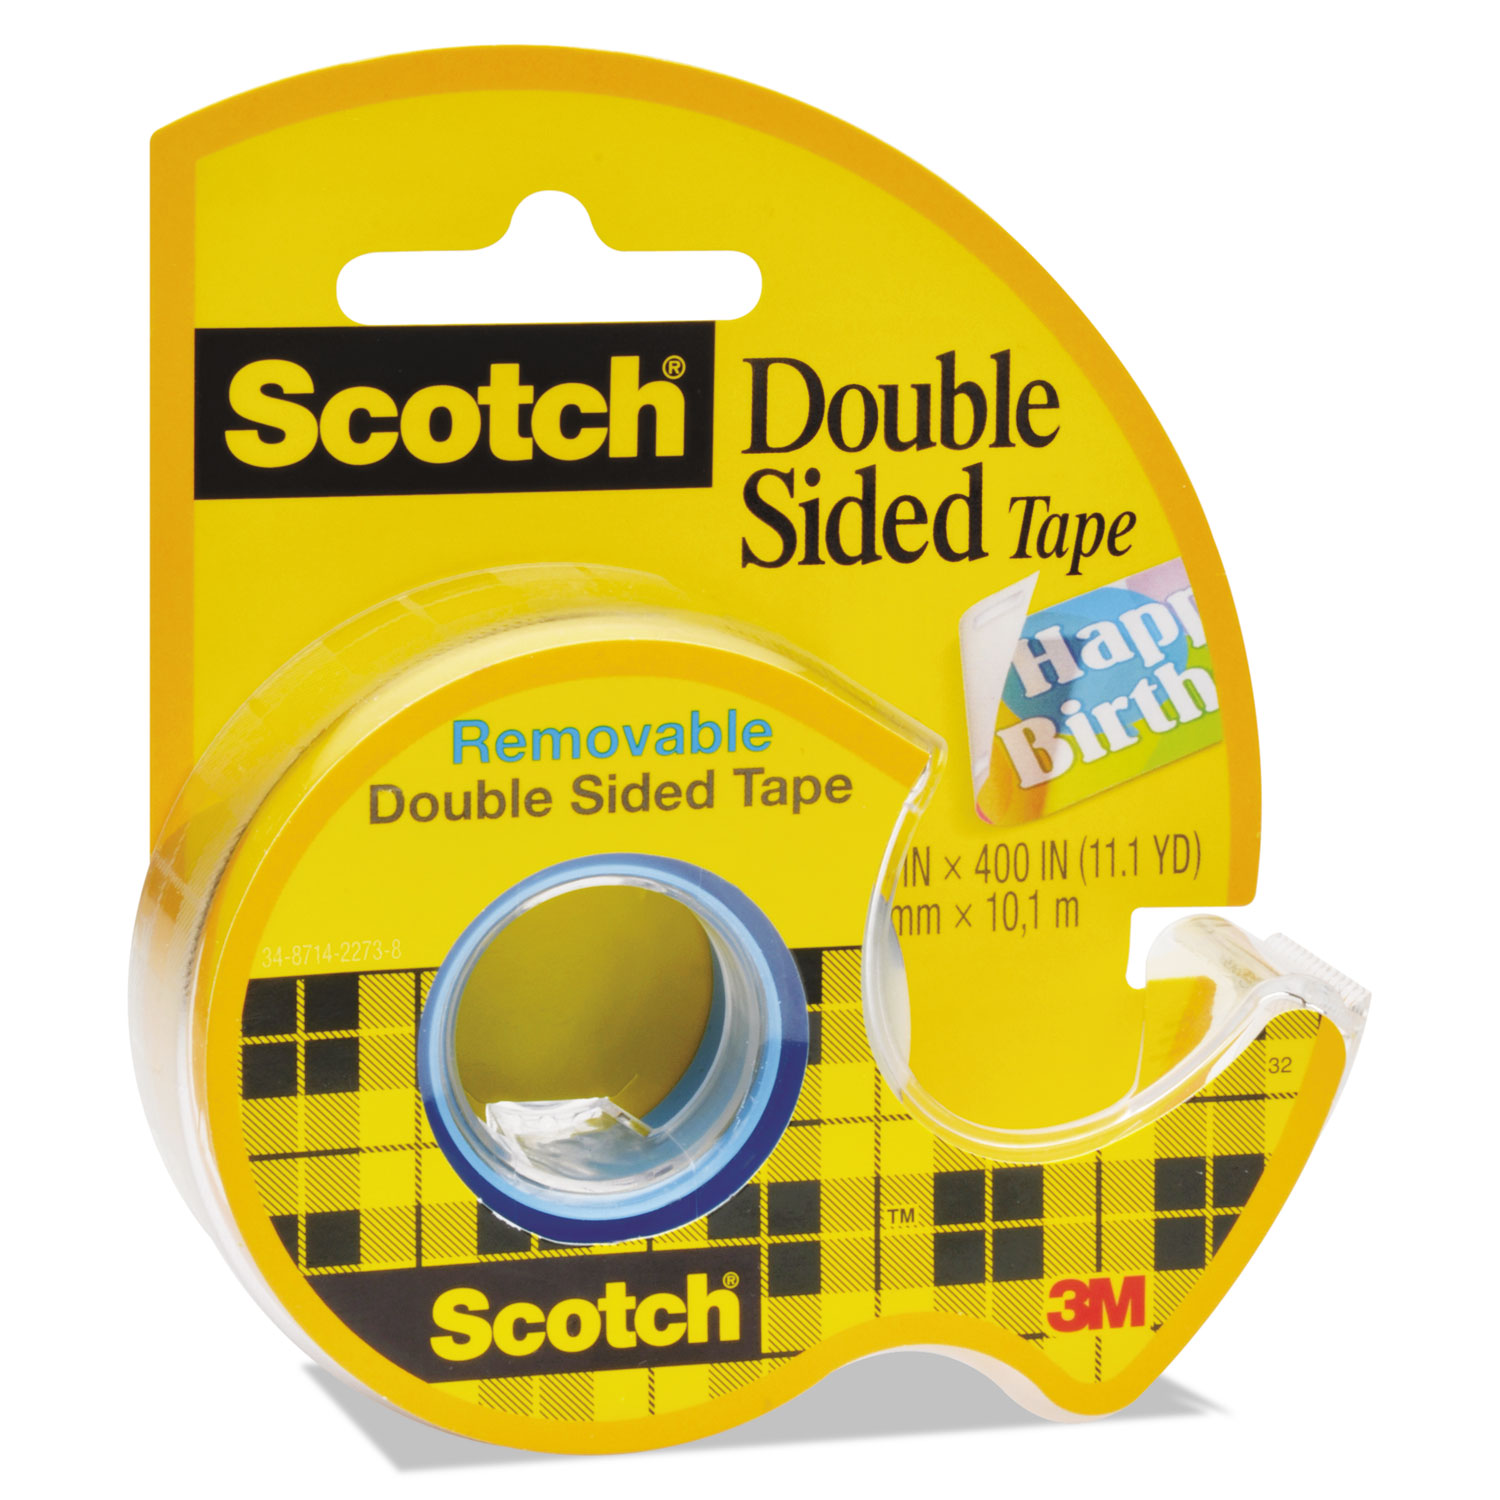 Scotch MMM667 667 Double-Sided Removable Tape and Dispenser, 3/4" x 400", Clear